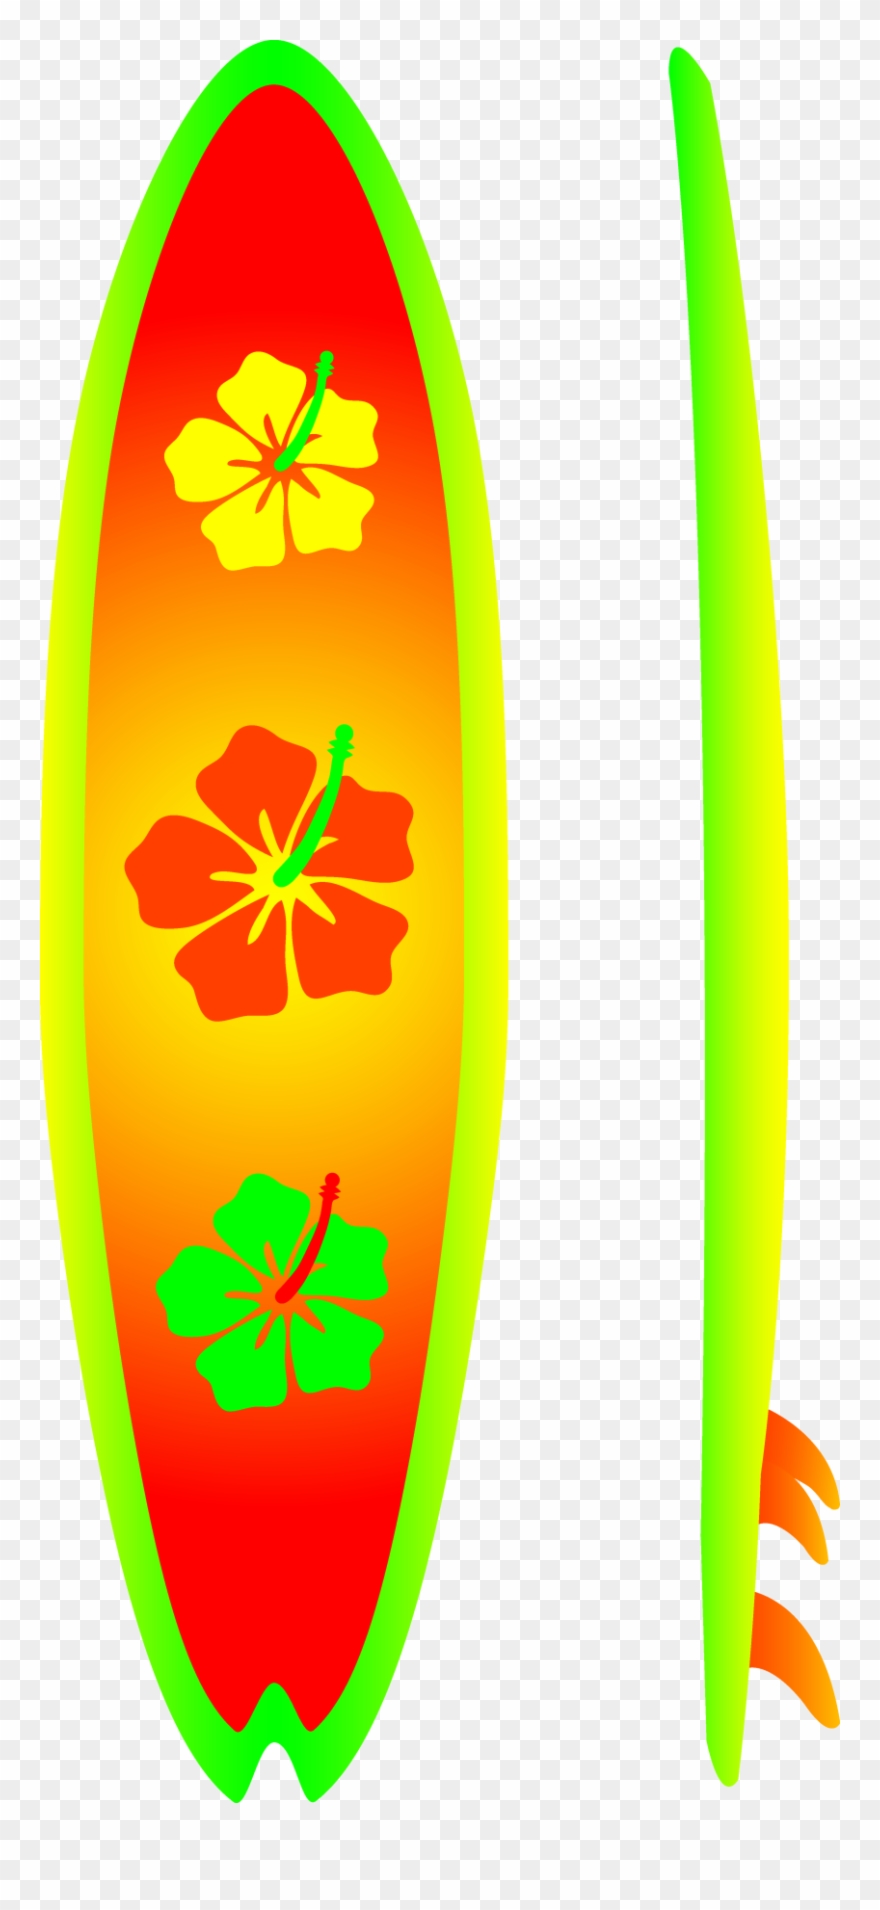 Neon Surfboard With Hibiscus Design Free Clip Art